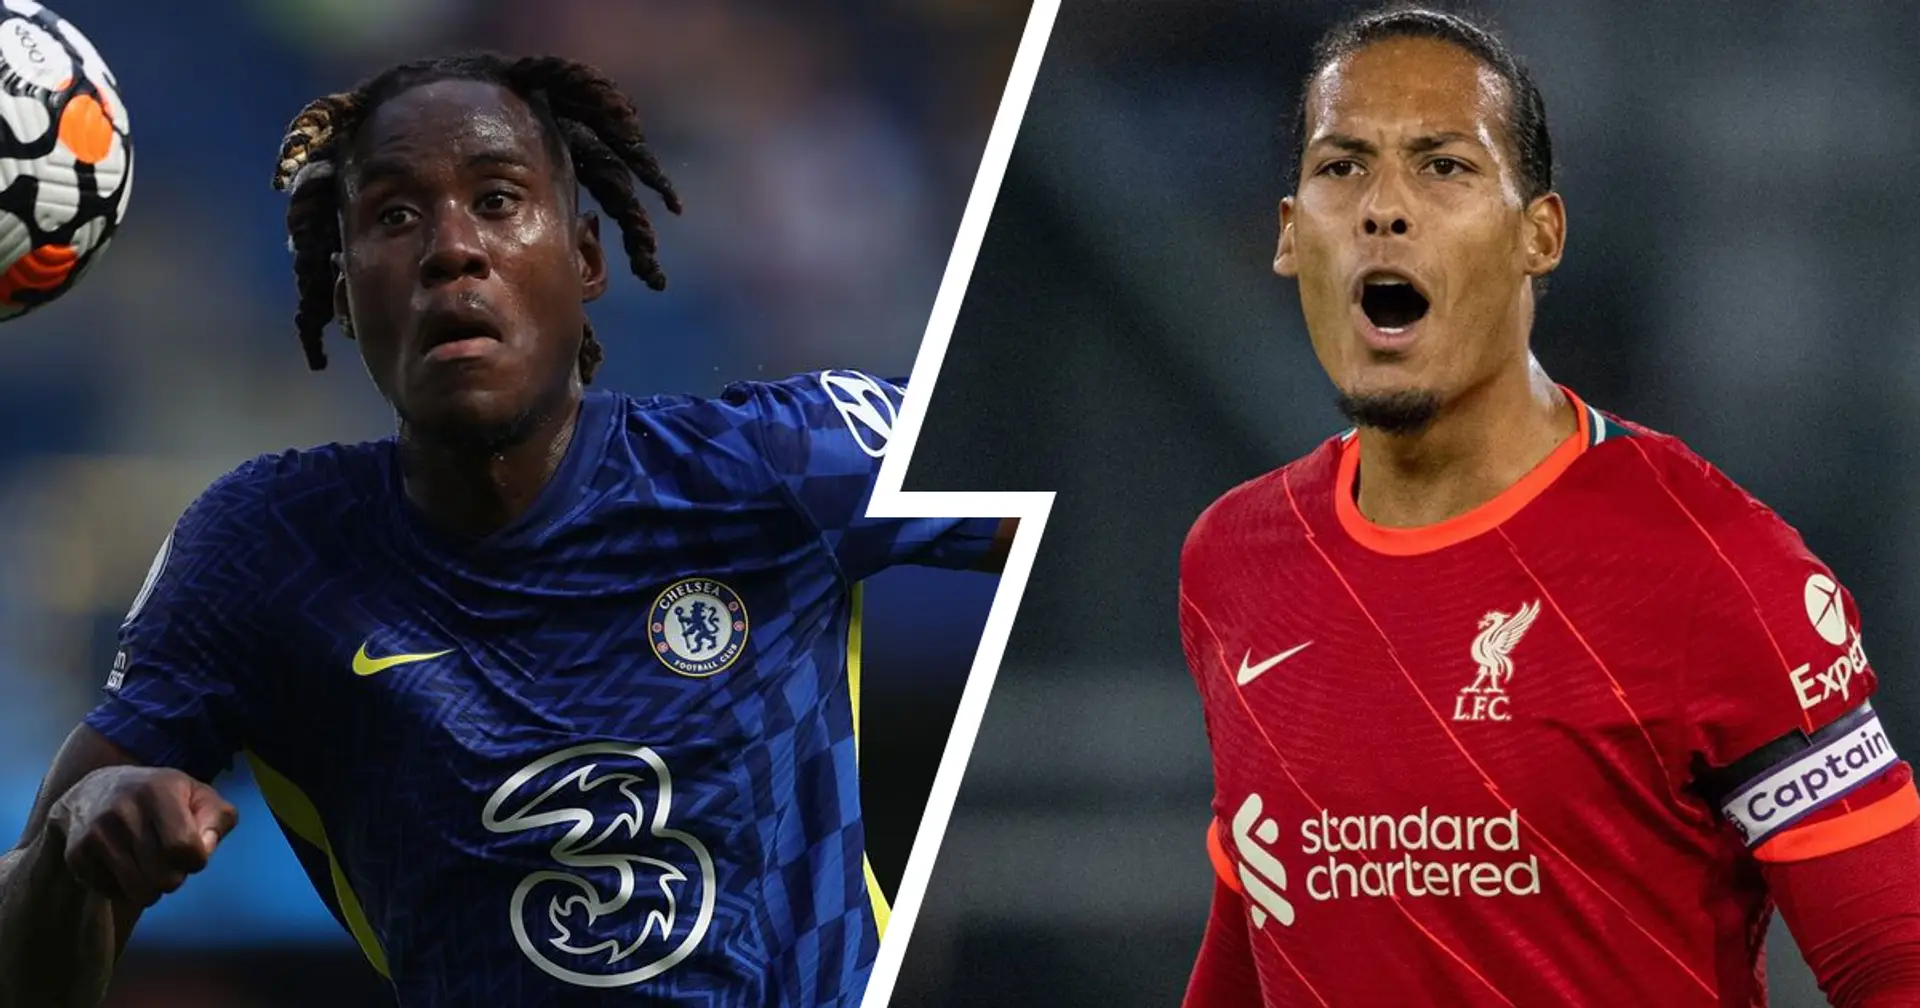 Ian Wright names one reason why Trevoh Chaloba's rise reminds him of Virgil van Dijk